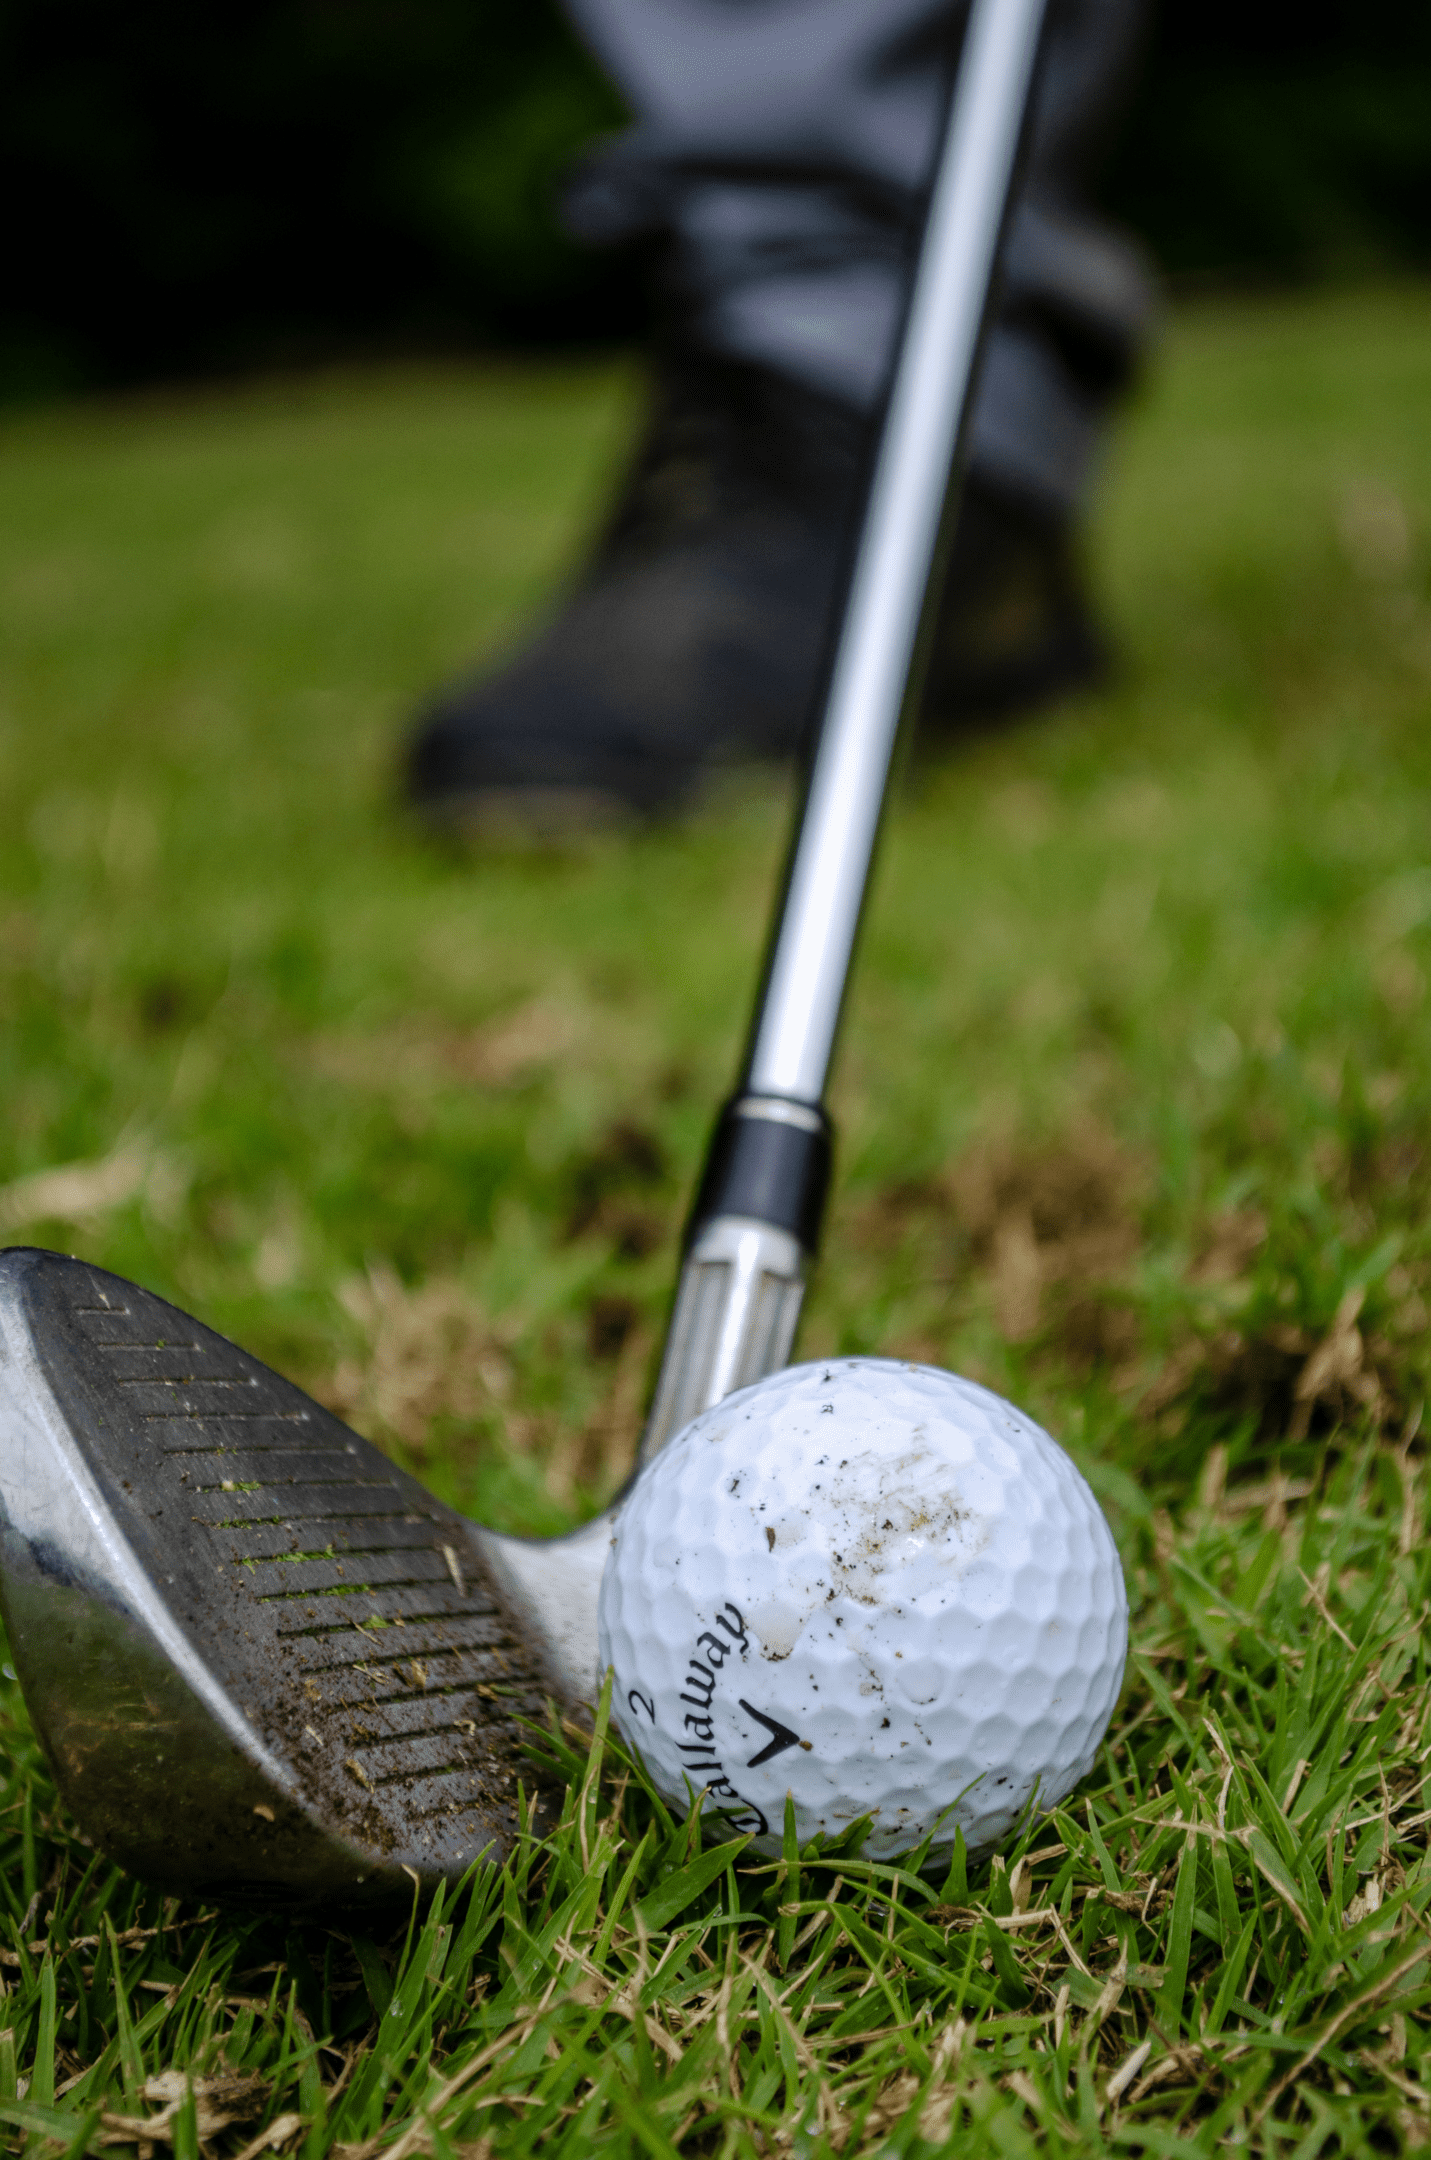 golf clubs hit a small golf ball and can cause golf injuries with a freak accident